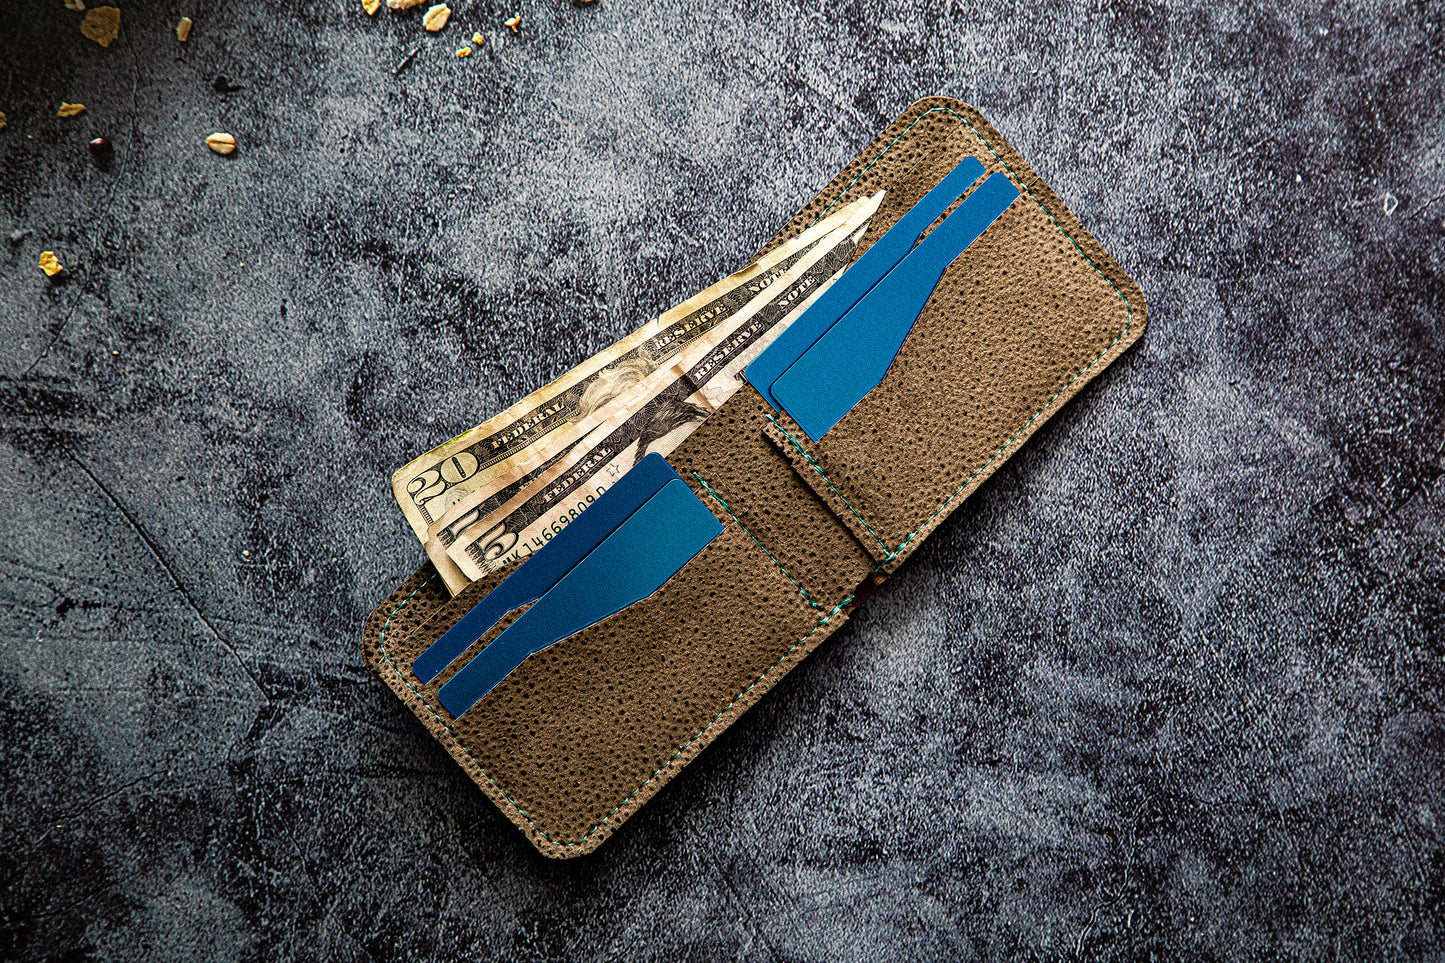 Handmade Bi-Fold Wallet with Four Card Slots and Bills/Notes Compartment - Available in Multiple Colors and Designs